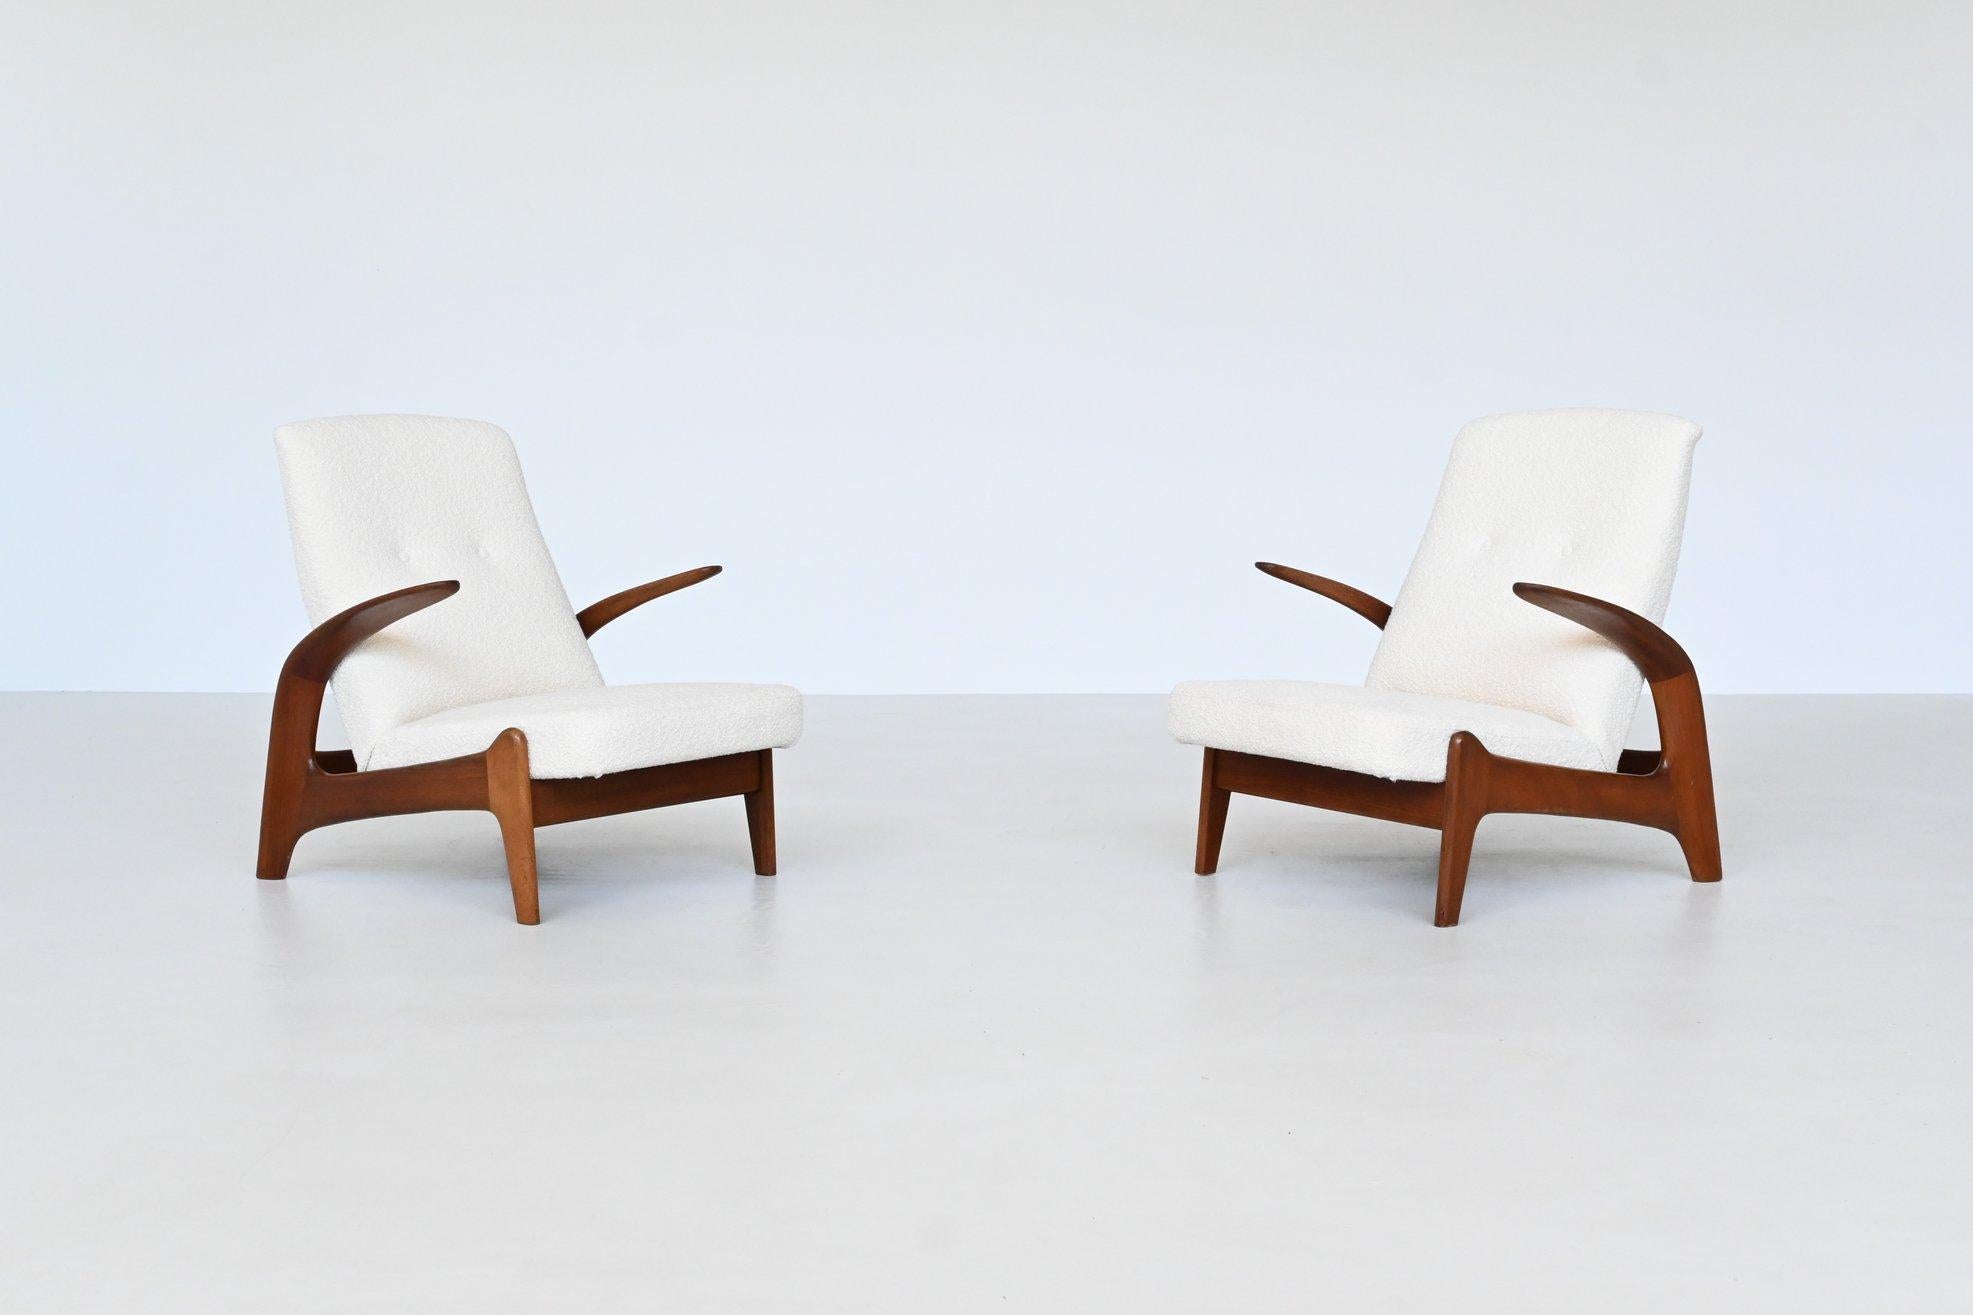 Fantastically shaped pair of lounge chairs model Rock ‘n Rest designed in Norway by Rolf Rastad and Adolf Relling and manufactured in the UK by Gimson and Slater, 1960. These sculptural low back chairs feature a solid teak wooden frame and they are